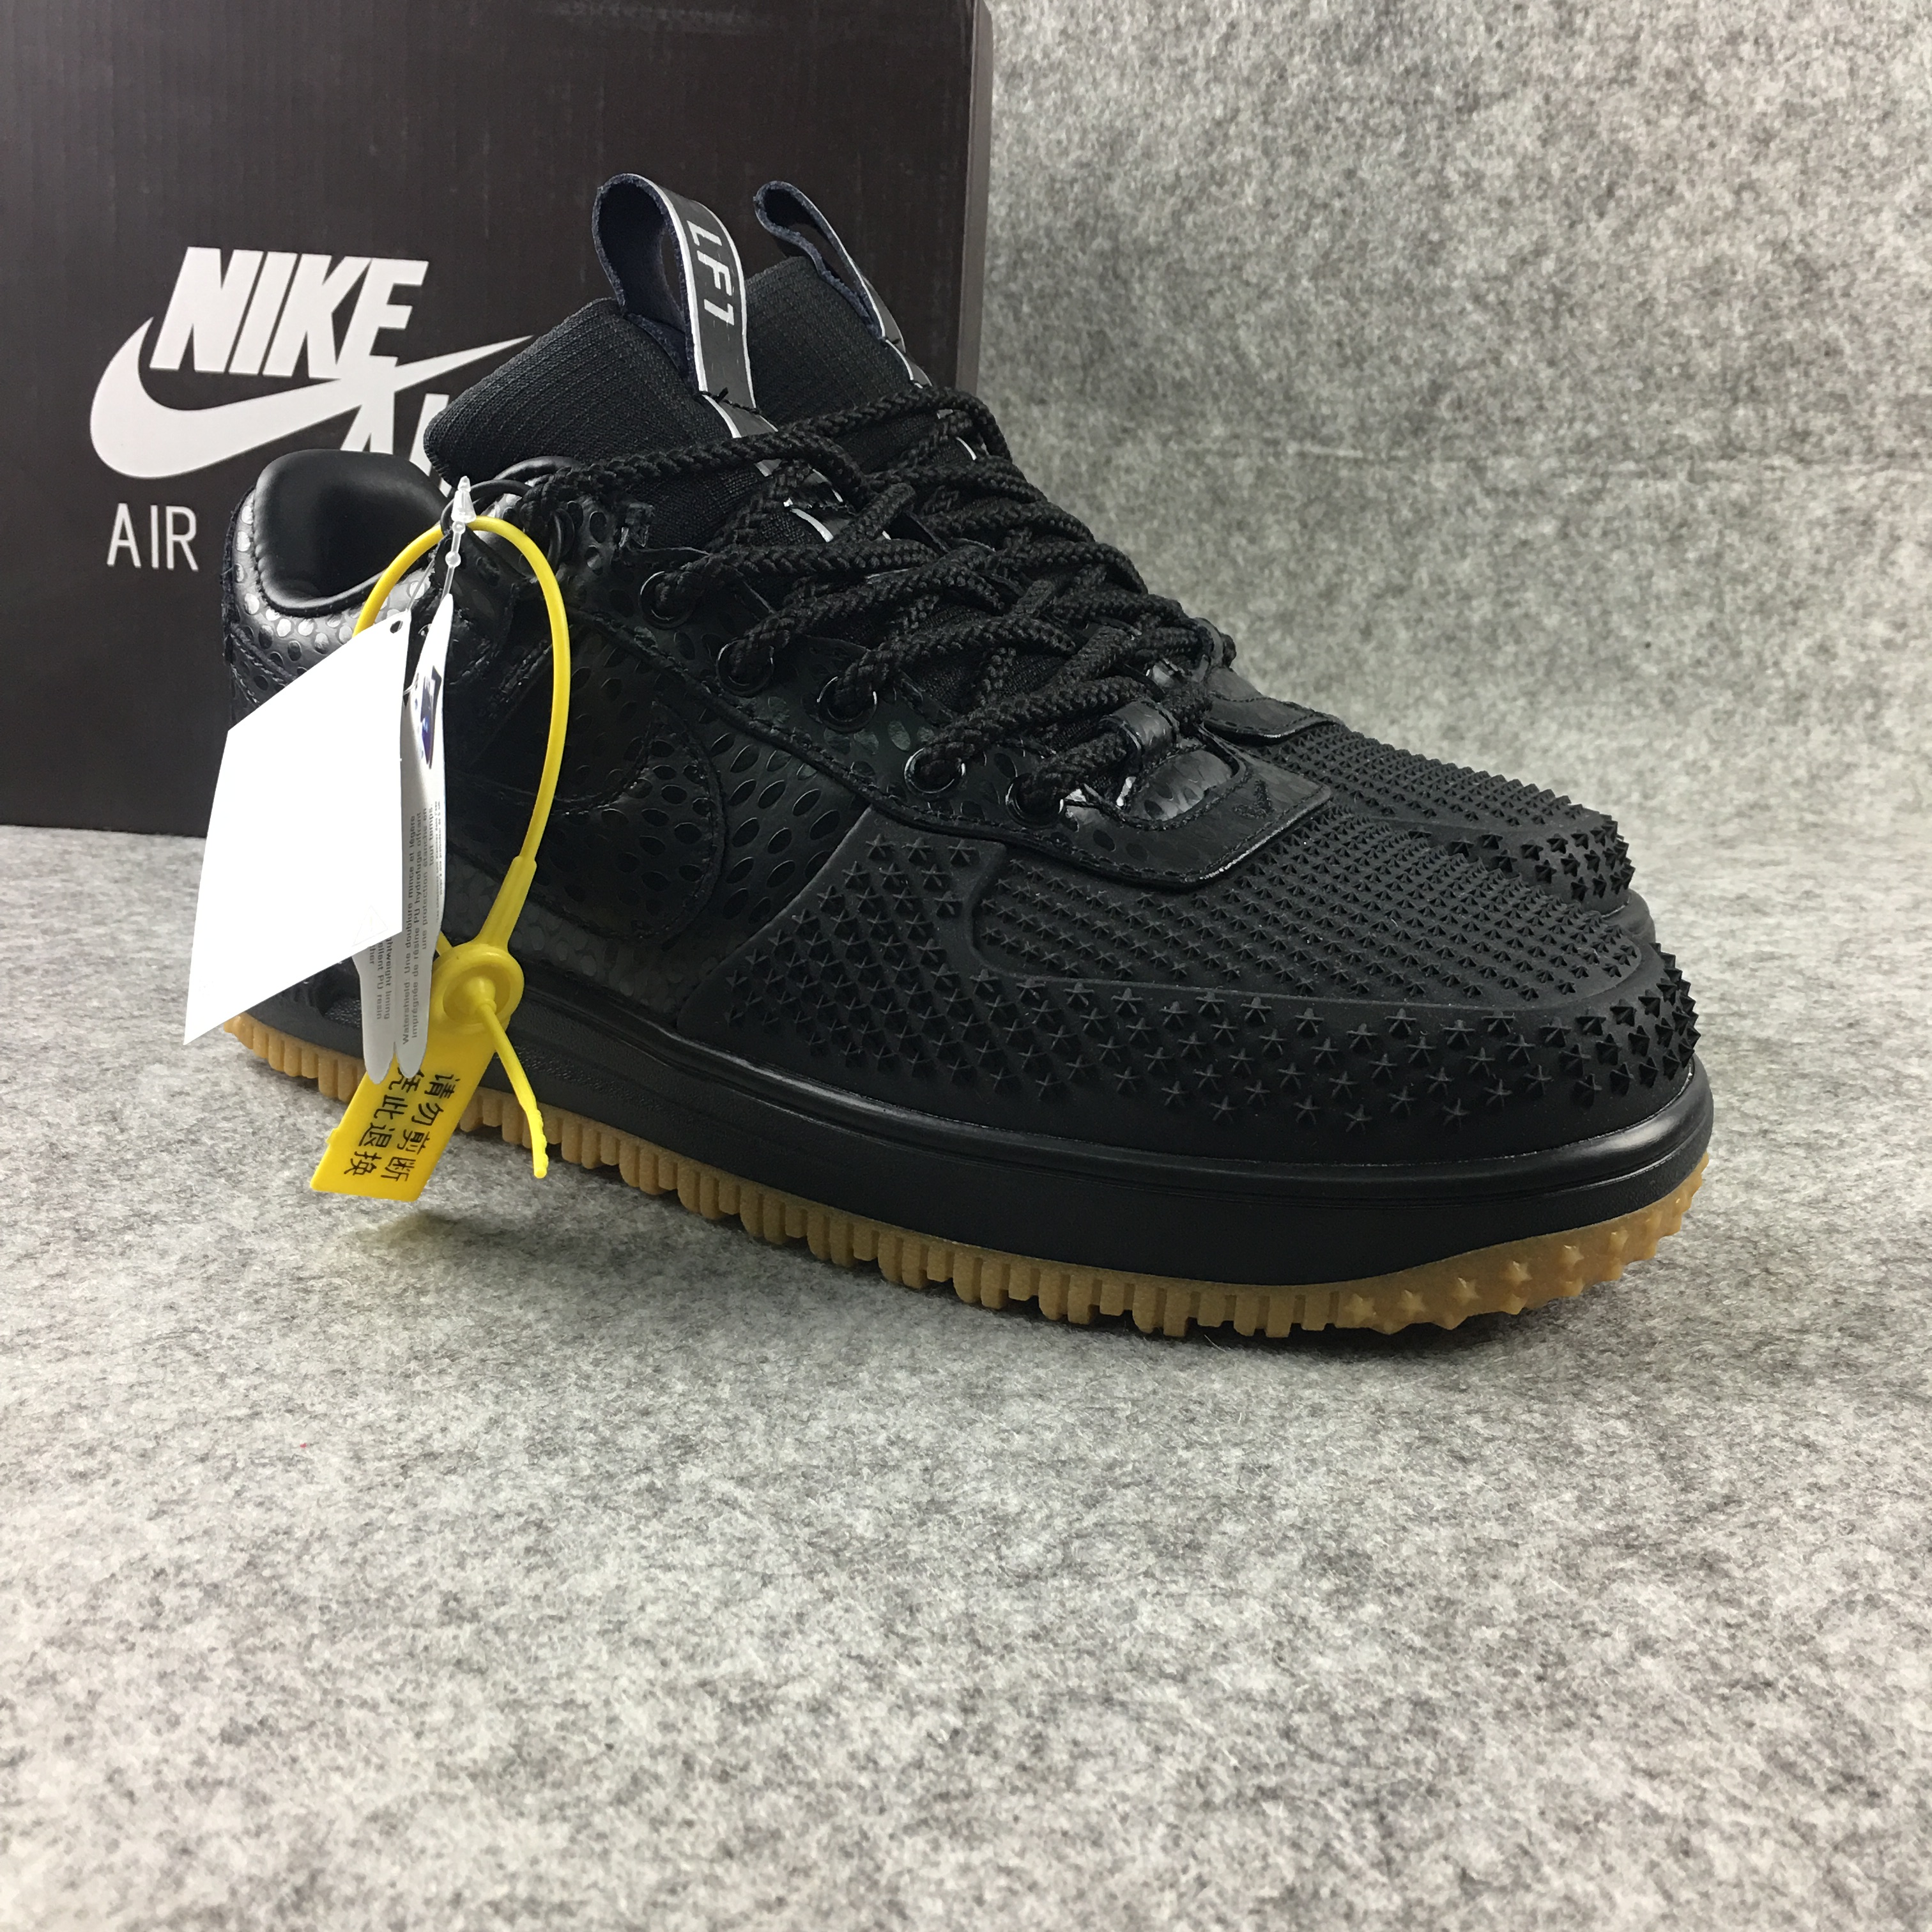 Nike Lunar Force 1 Low All Black Shoes